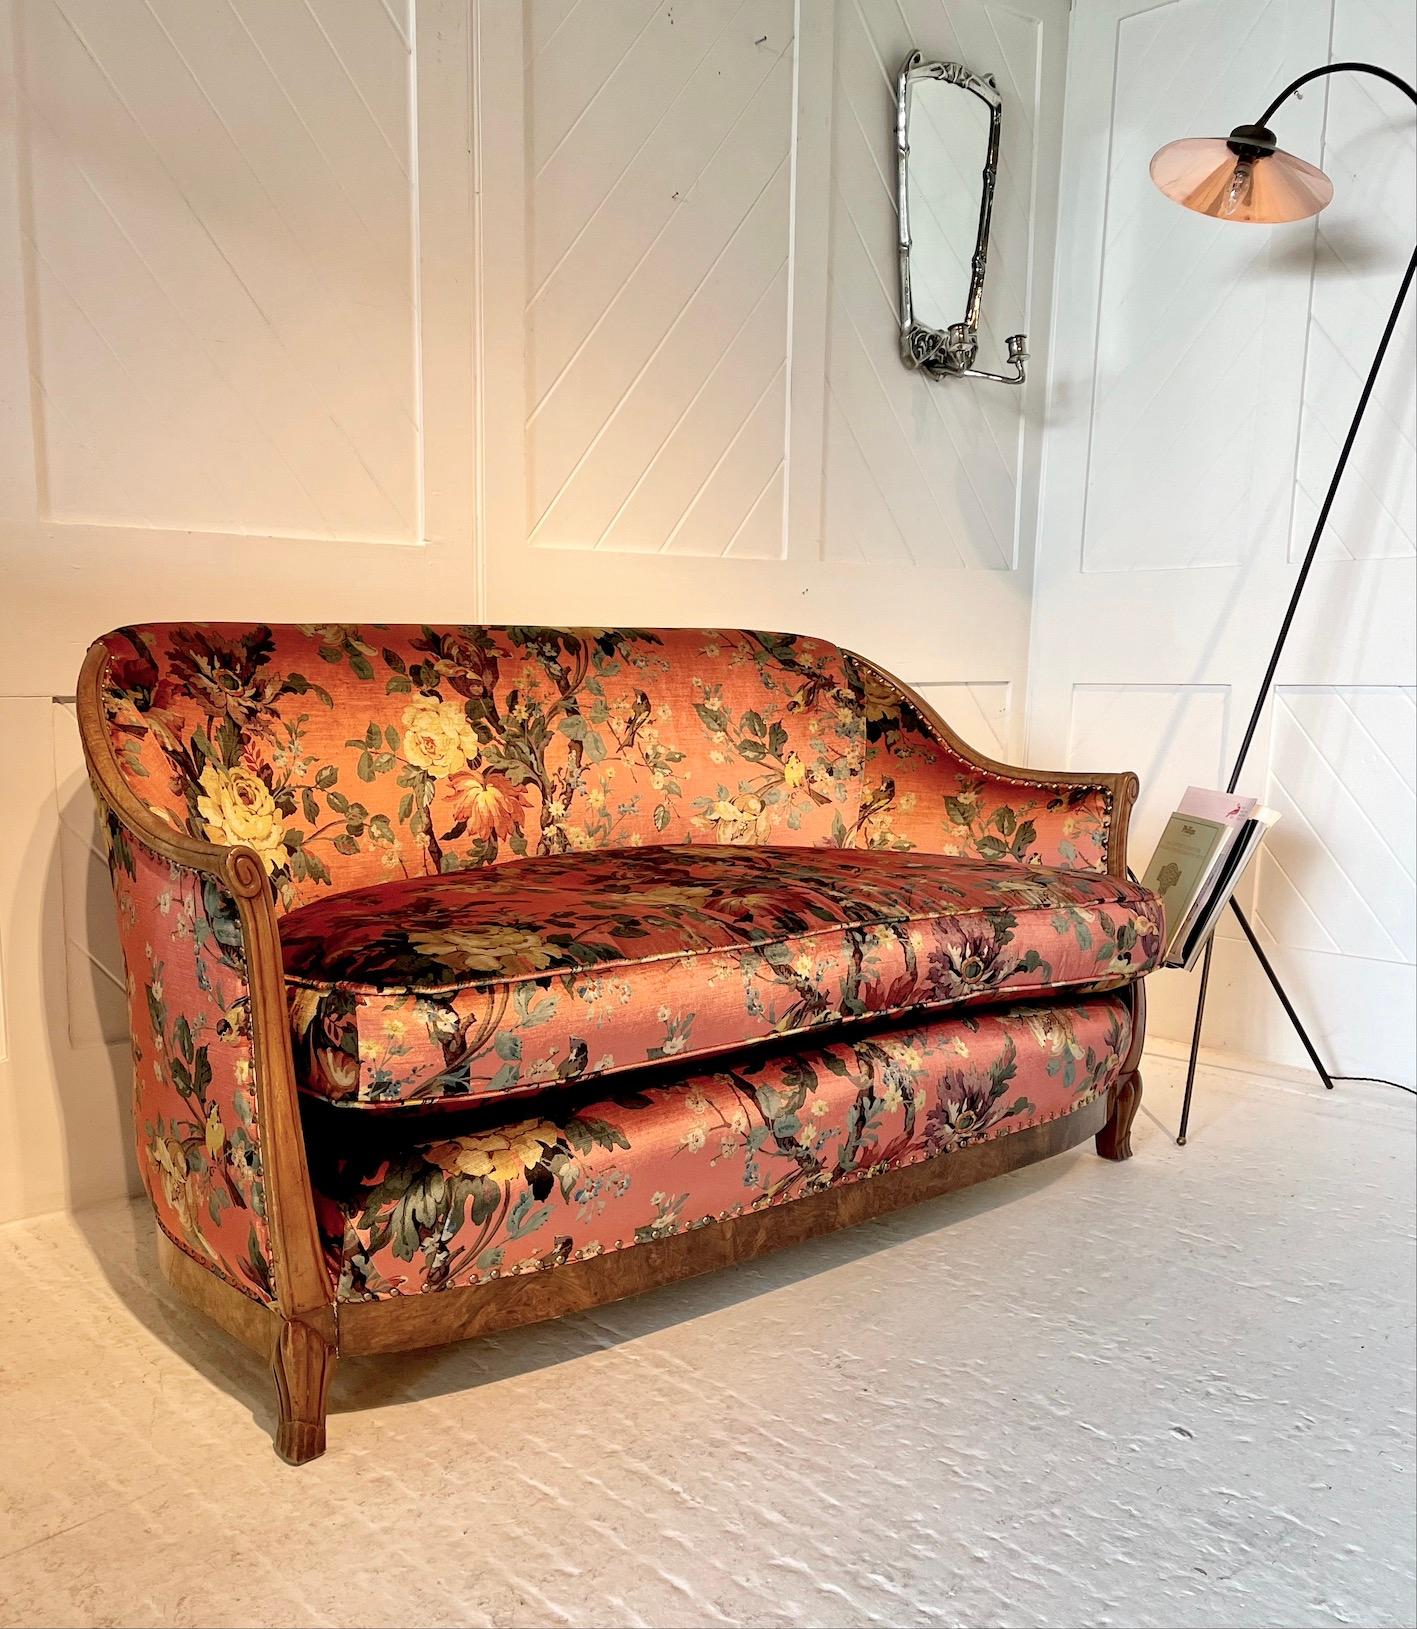 A beautiful example of a curved Art Deco settee which has been inspired by the designs of Jules Leleu

Attributed to Heal & Son

It has a walnut frame with burr walnut skirt

This settee has been re-upholstered in Liberty ’Lady Christina’ floral